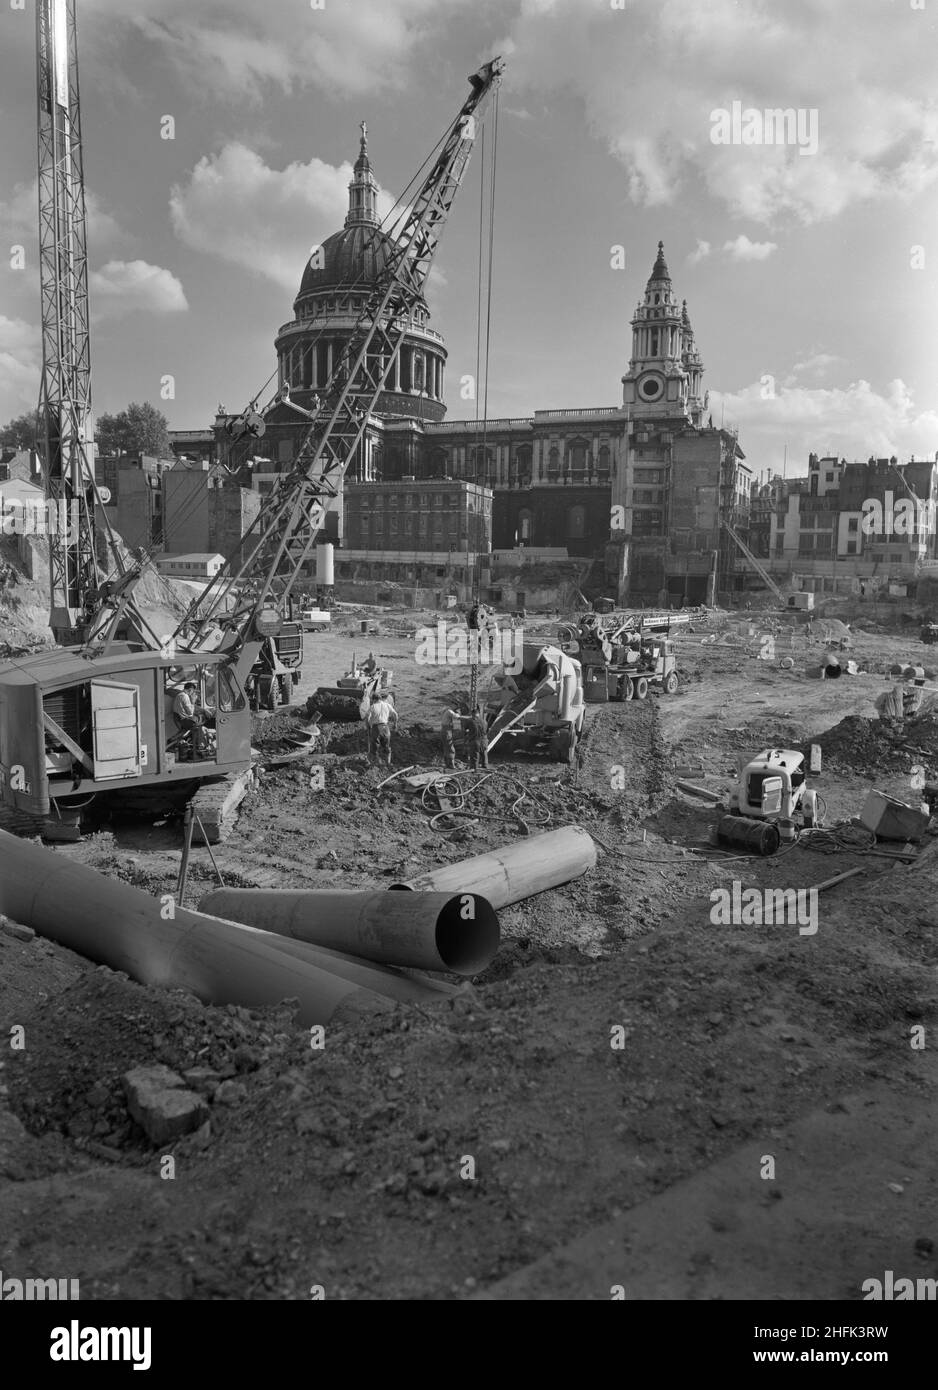 Paternoster Square, City of London, 15/09/1961. A McKinney Foundations crane and pile driver at work during the construction of the Paternoster development, with St Paul's Cathedral in the background. Work on the Paternoster development was carried out in a joint venture by John Laing Construction Limited, Trollope and Colls Limited, and George Wimpey and Company Limited. The scheme involved the redevelopment of a seven acre site on the north side of St Paul&#x2019;s Cathedral. The site had been almost entirely devastated during an incendiary raid in December 1940. The development consisted of Stock Photo